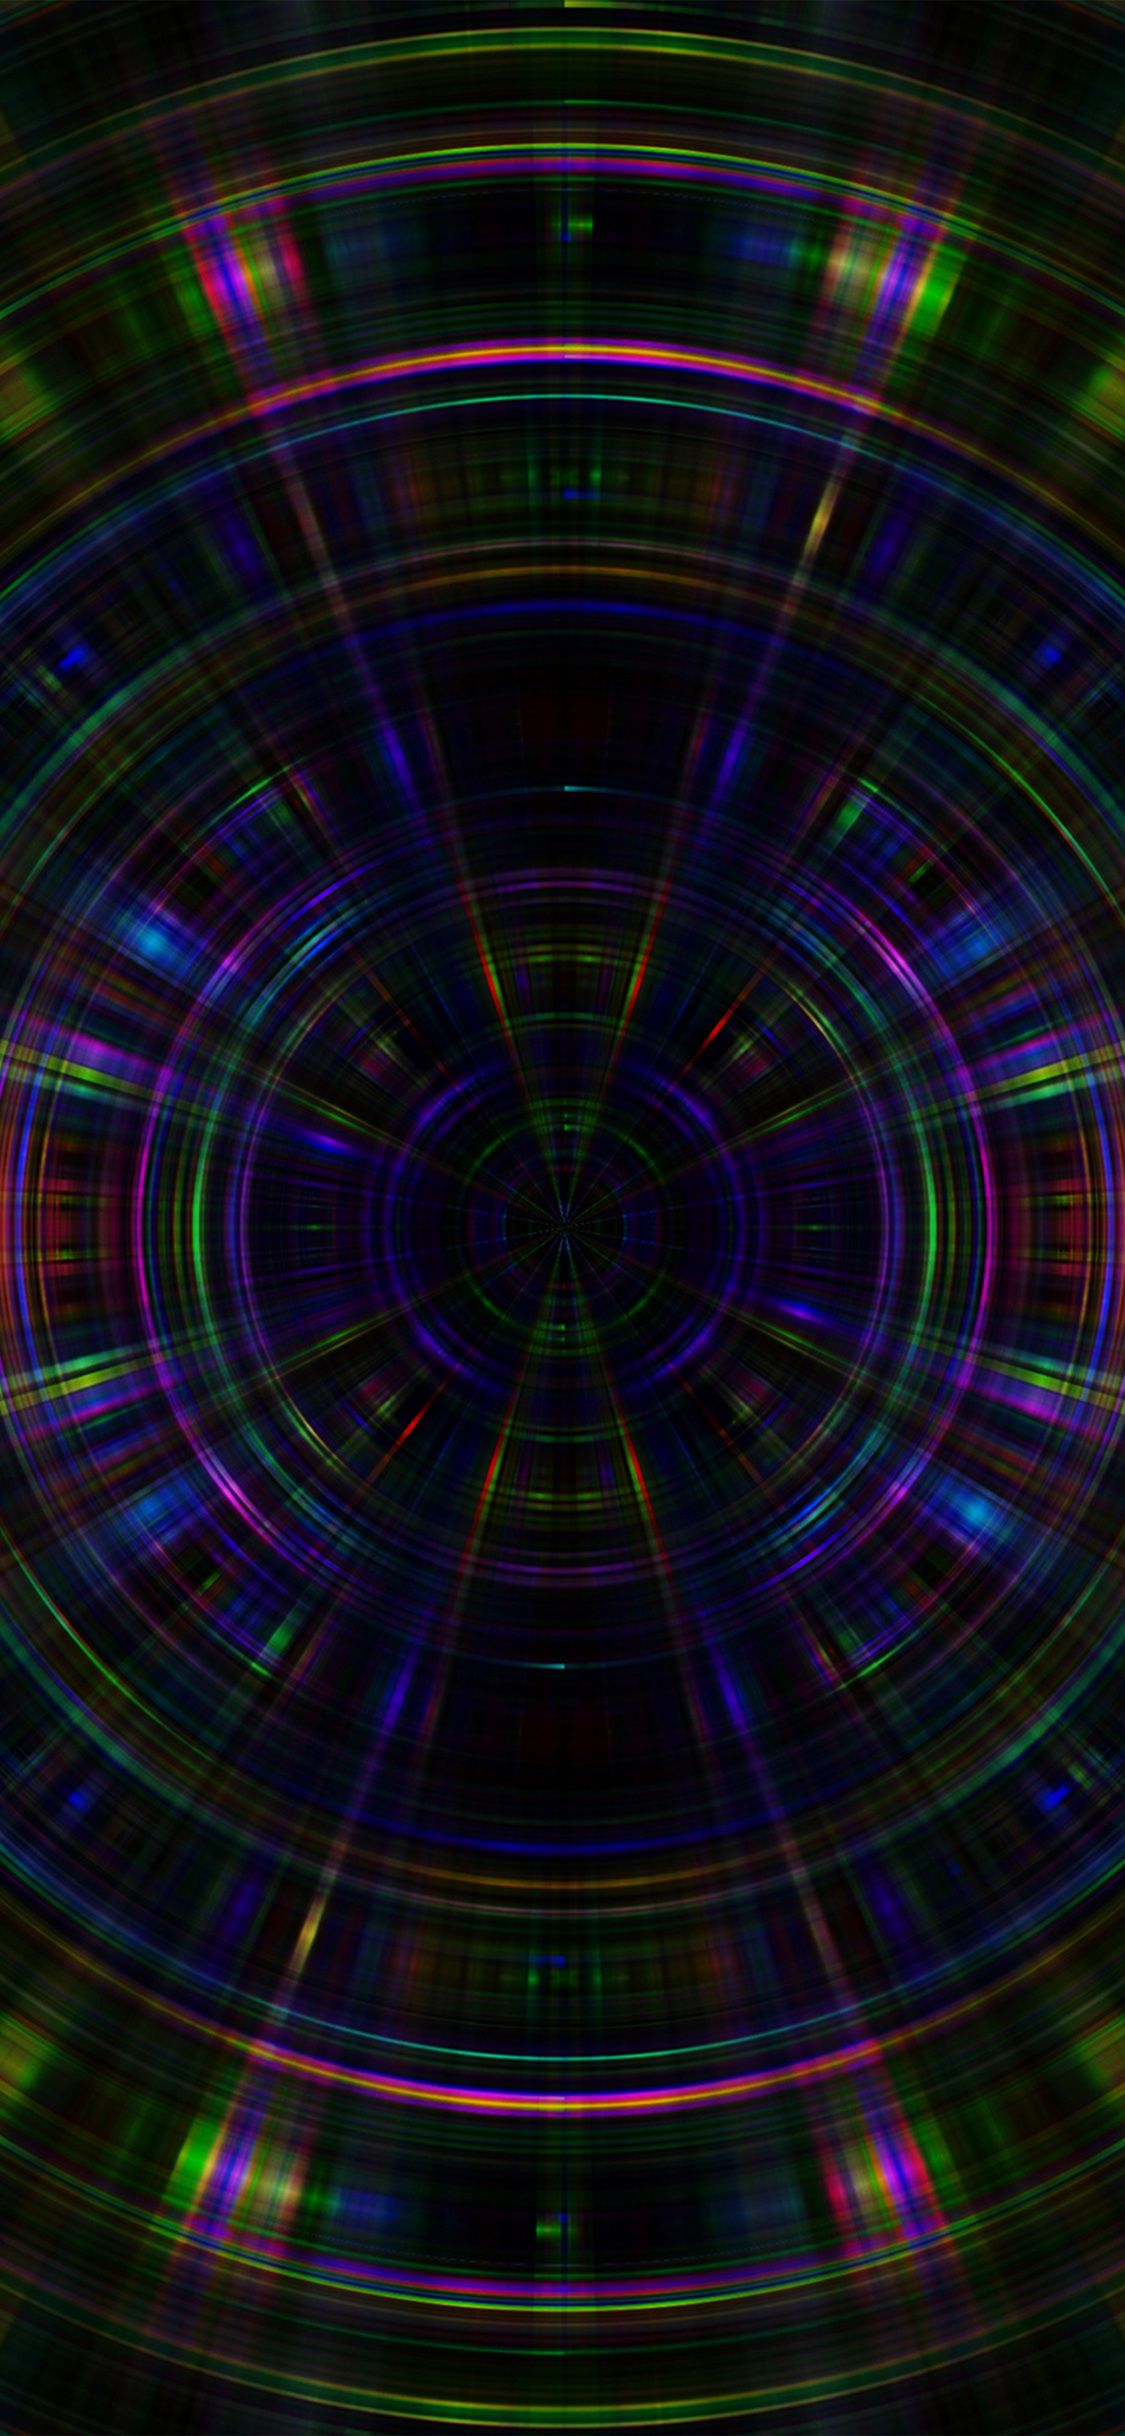 Psychic color circle abstract iPhone X Wallpaper Free Download